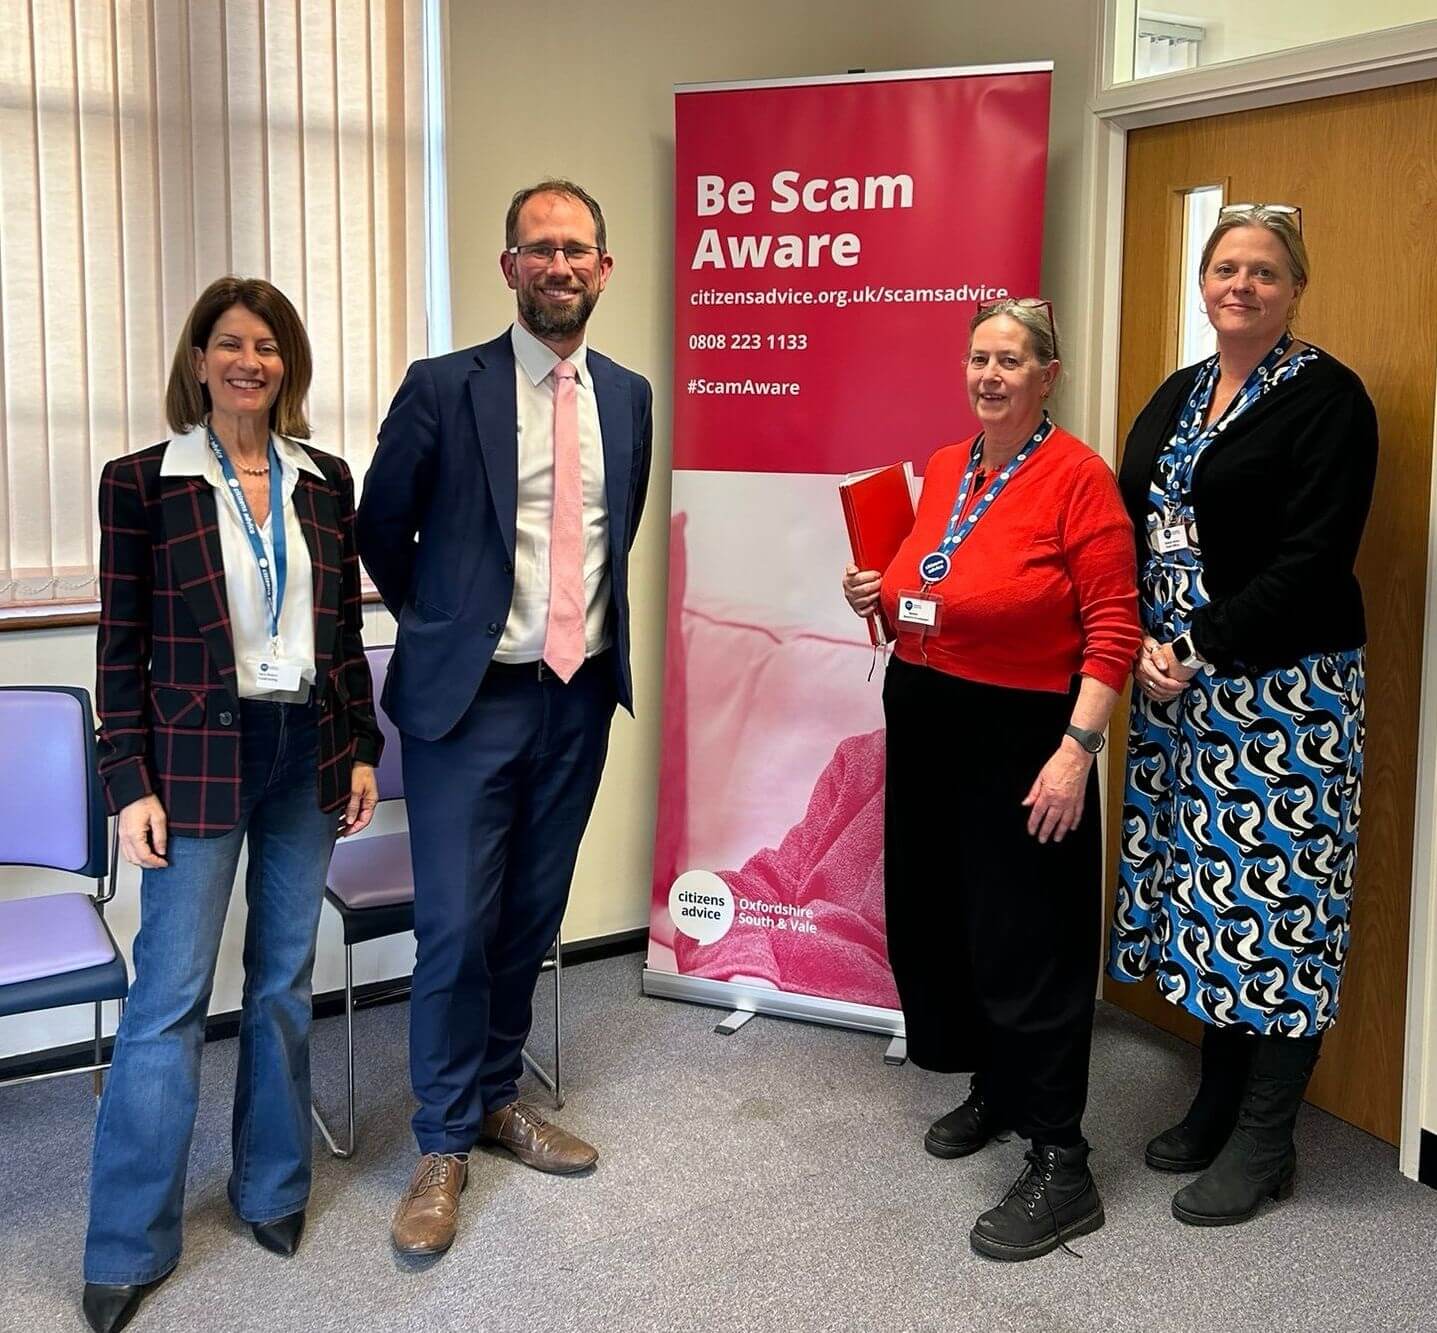 Matthew Barber with representatives from Citizens Advice Oxfordshire South & Vale in front of a Be Scam Aware banner